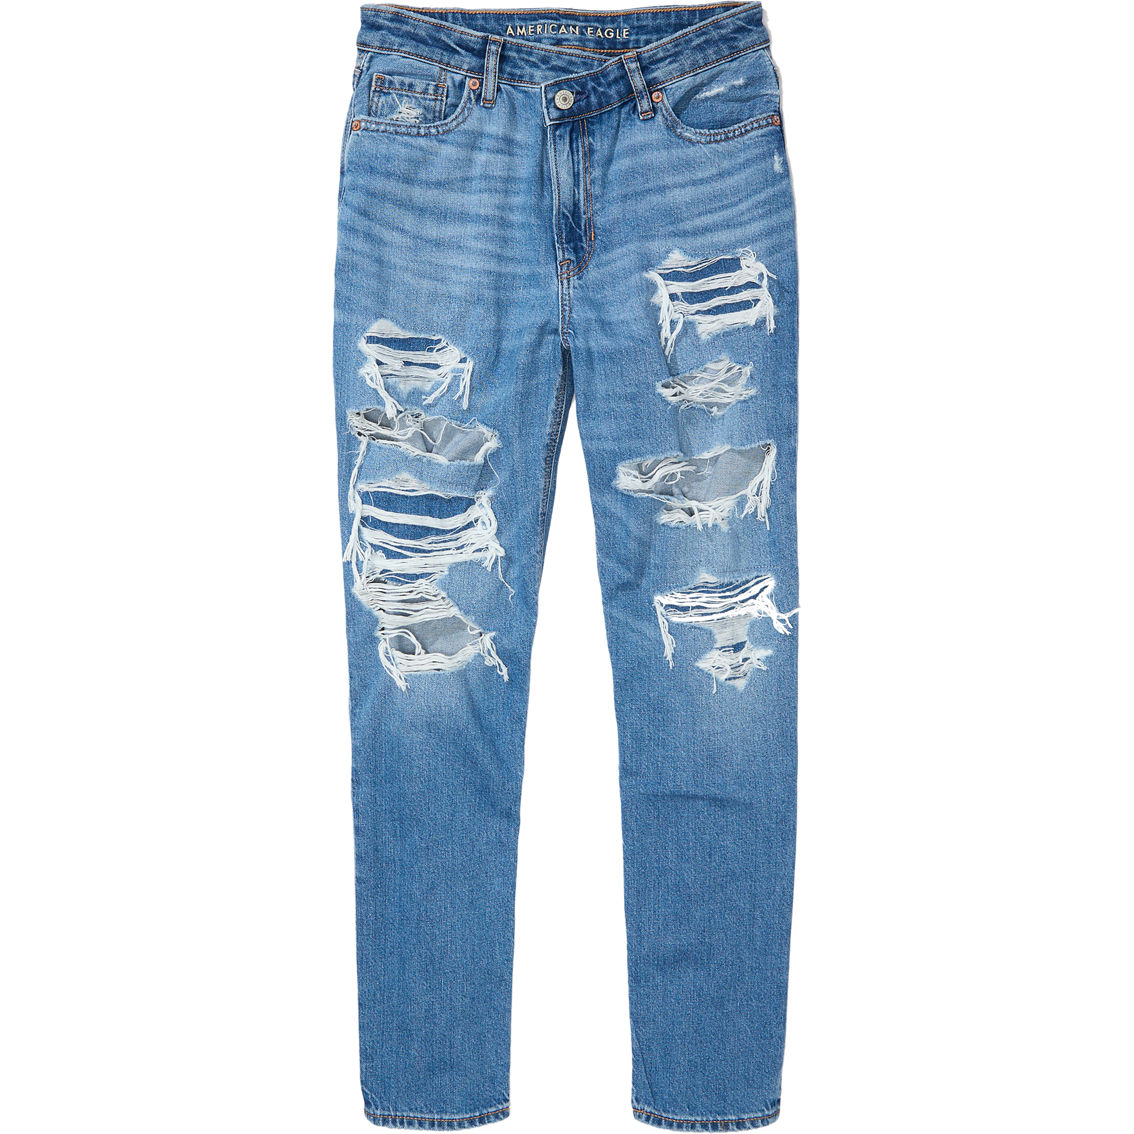 American Eagle Strigid Ripped Mom Jeans - Image 4 of 5